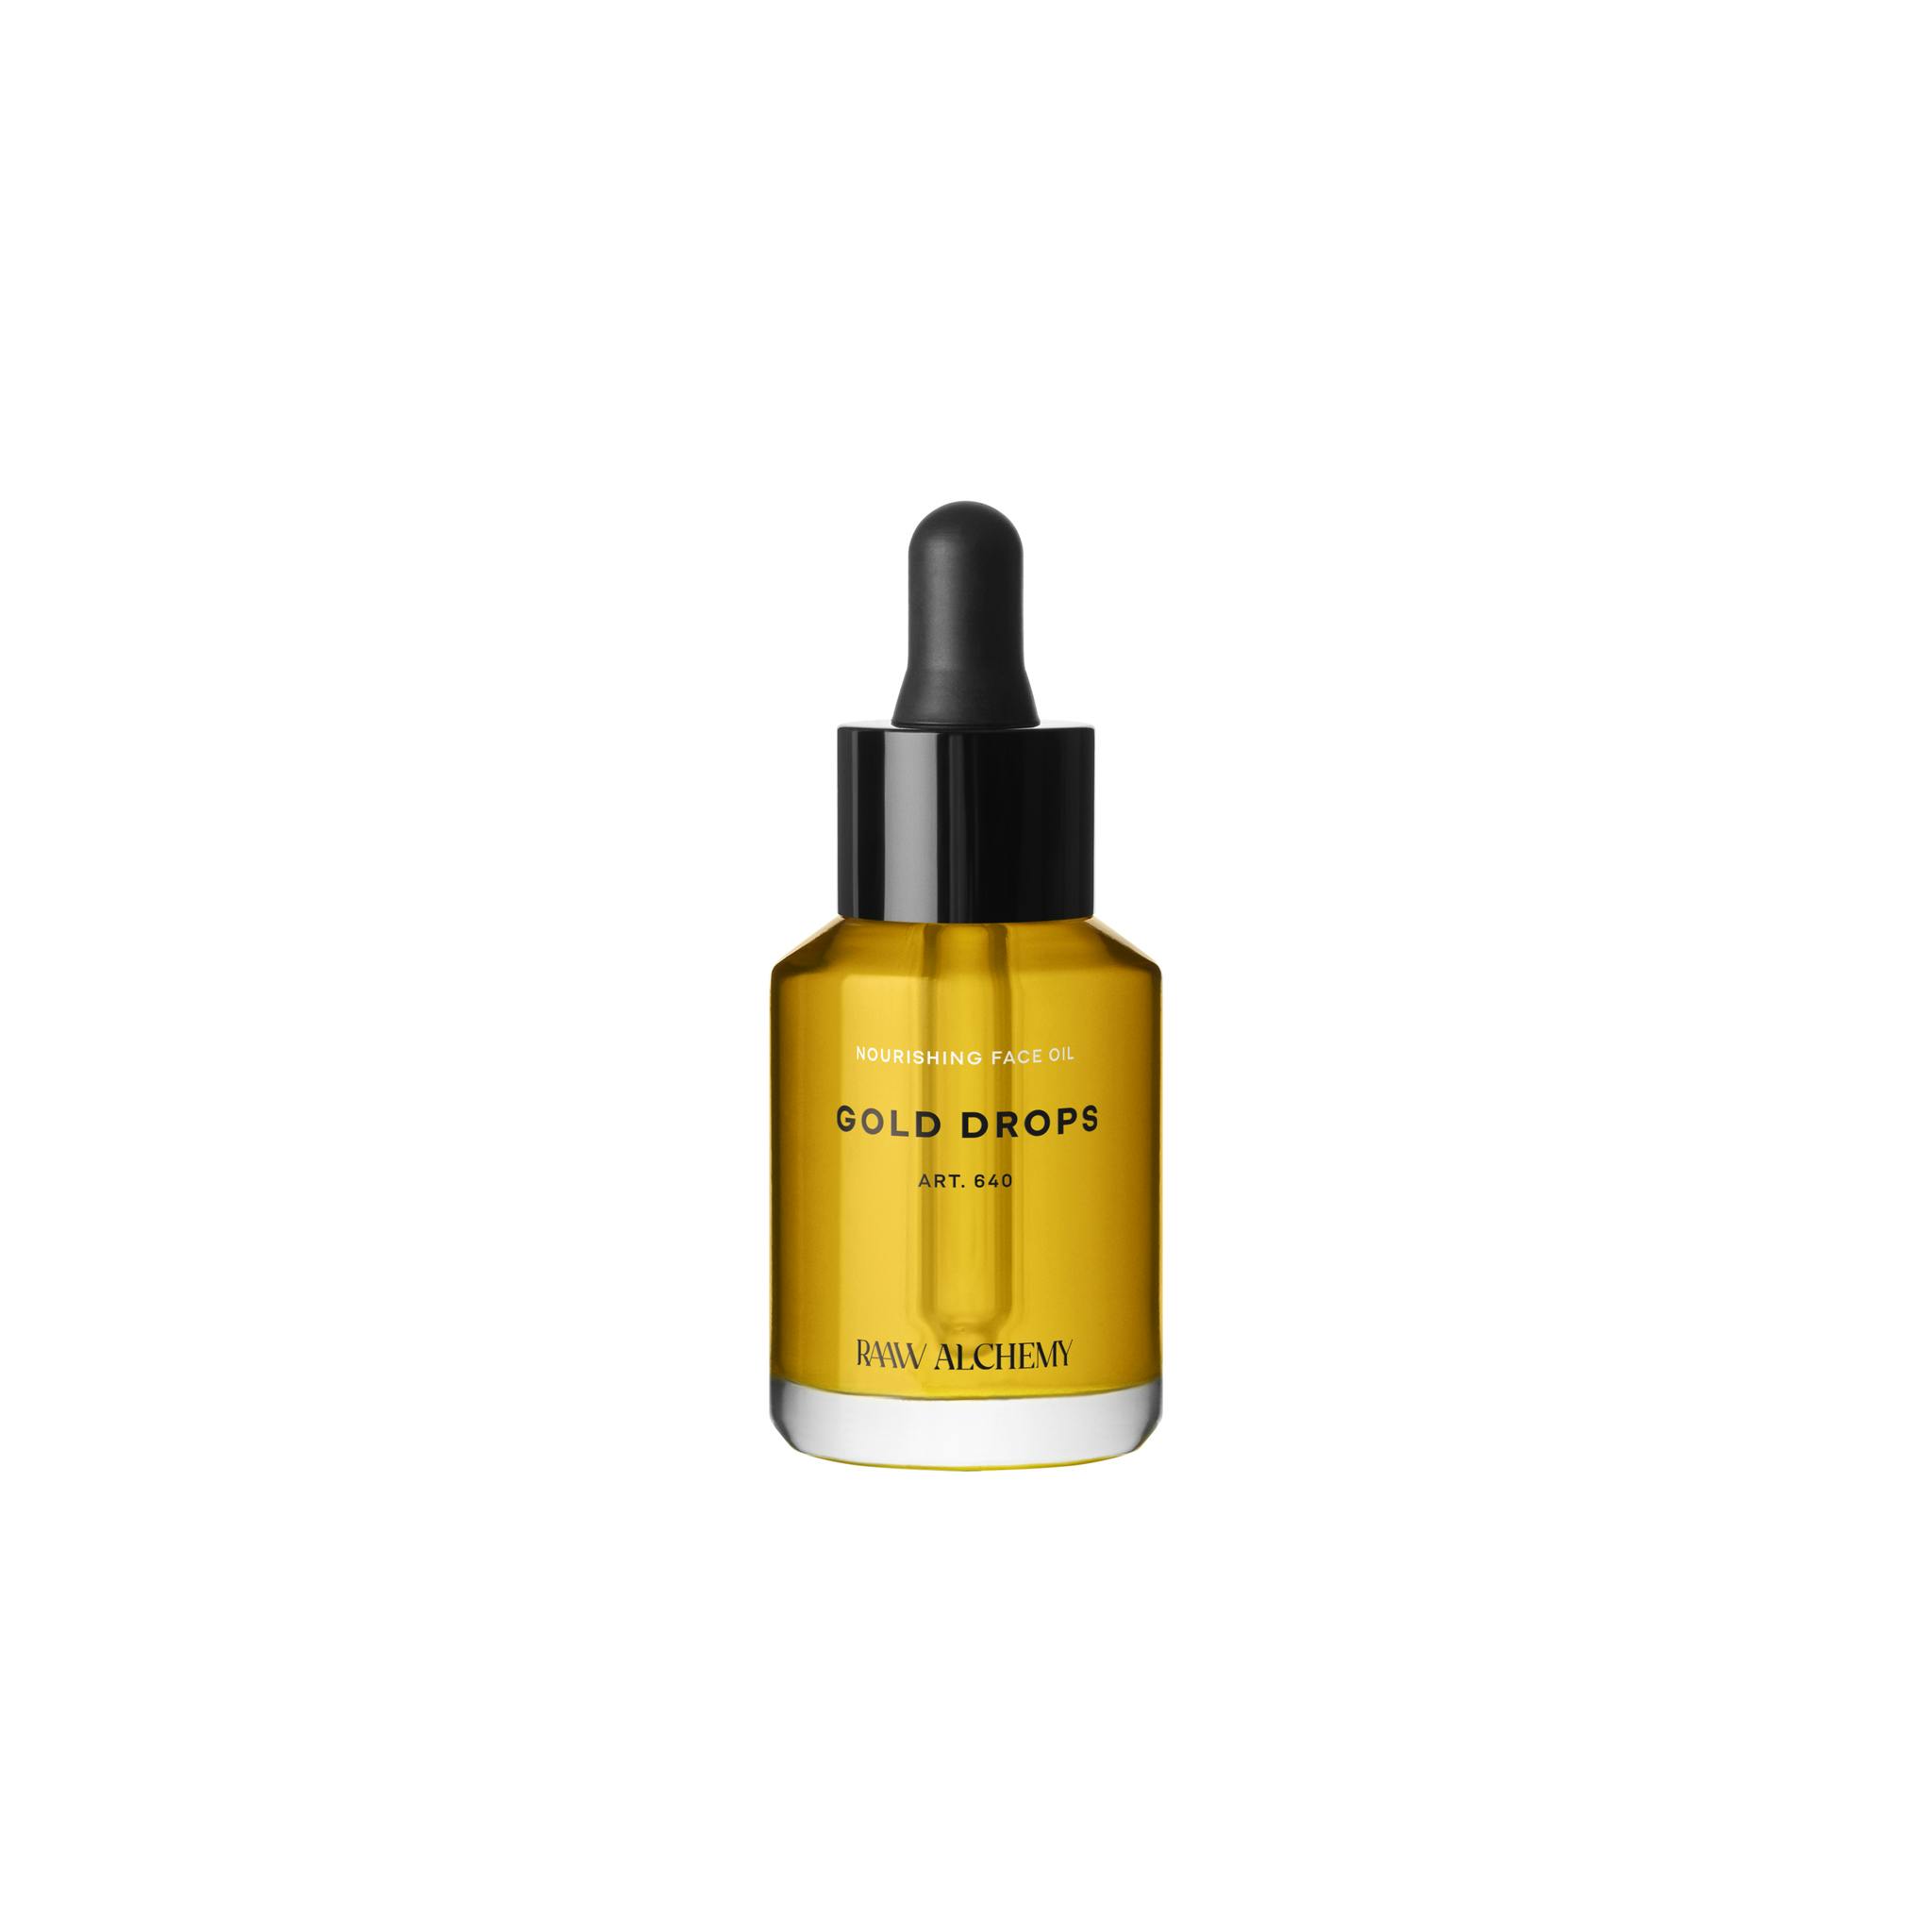 Golden drops of rich botanical oils such as Sea Buckthorn to deliver high levels of vitamins and antioxidants to the skin. Anti ageing & repairing.